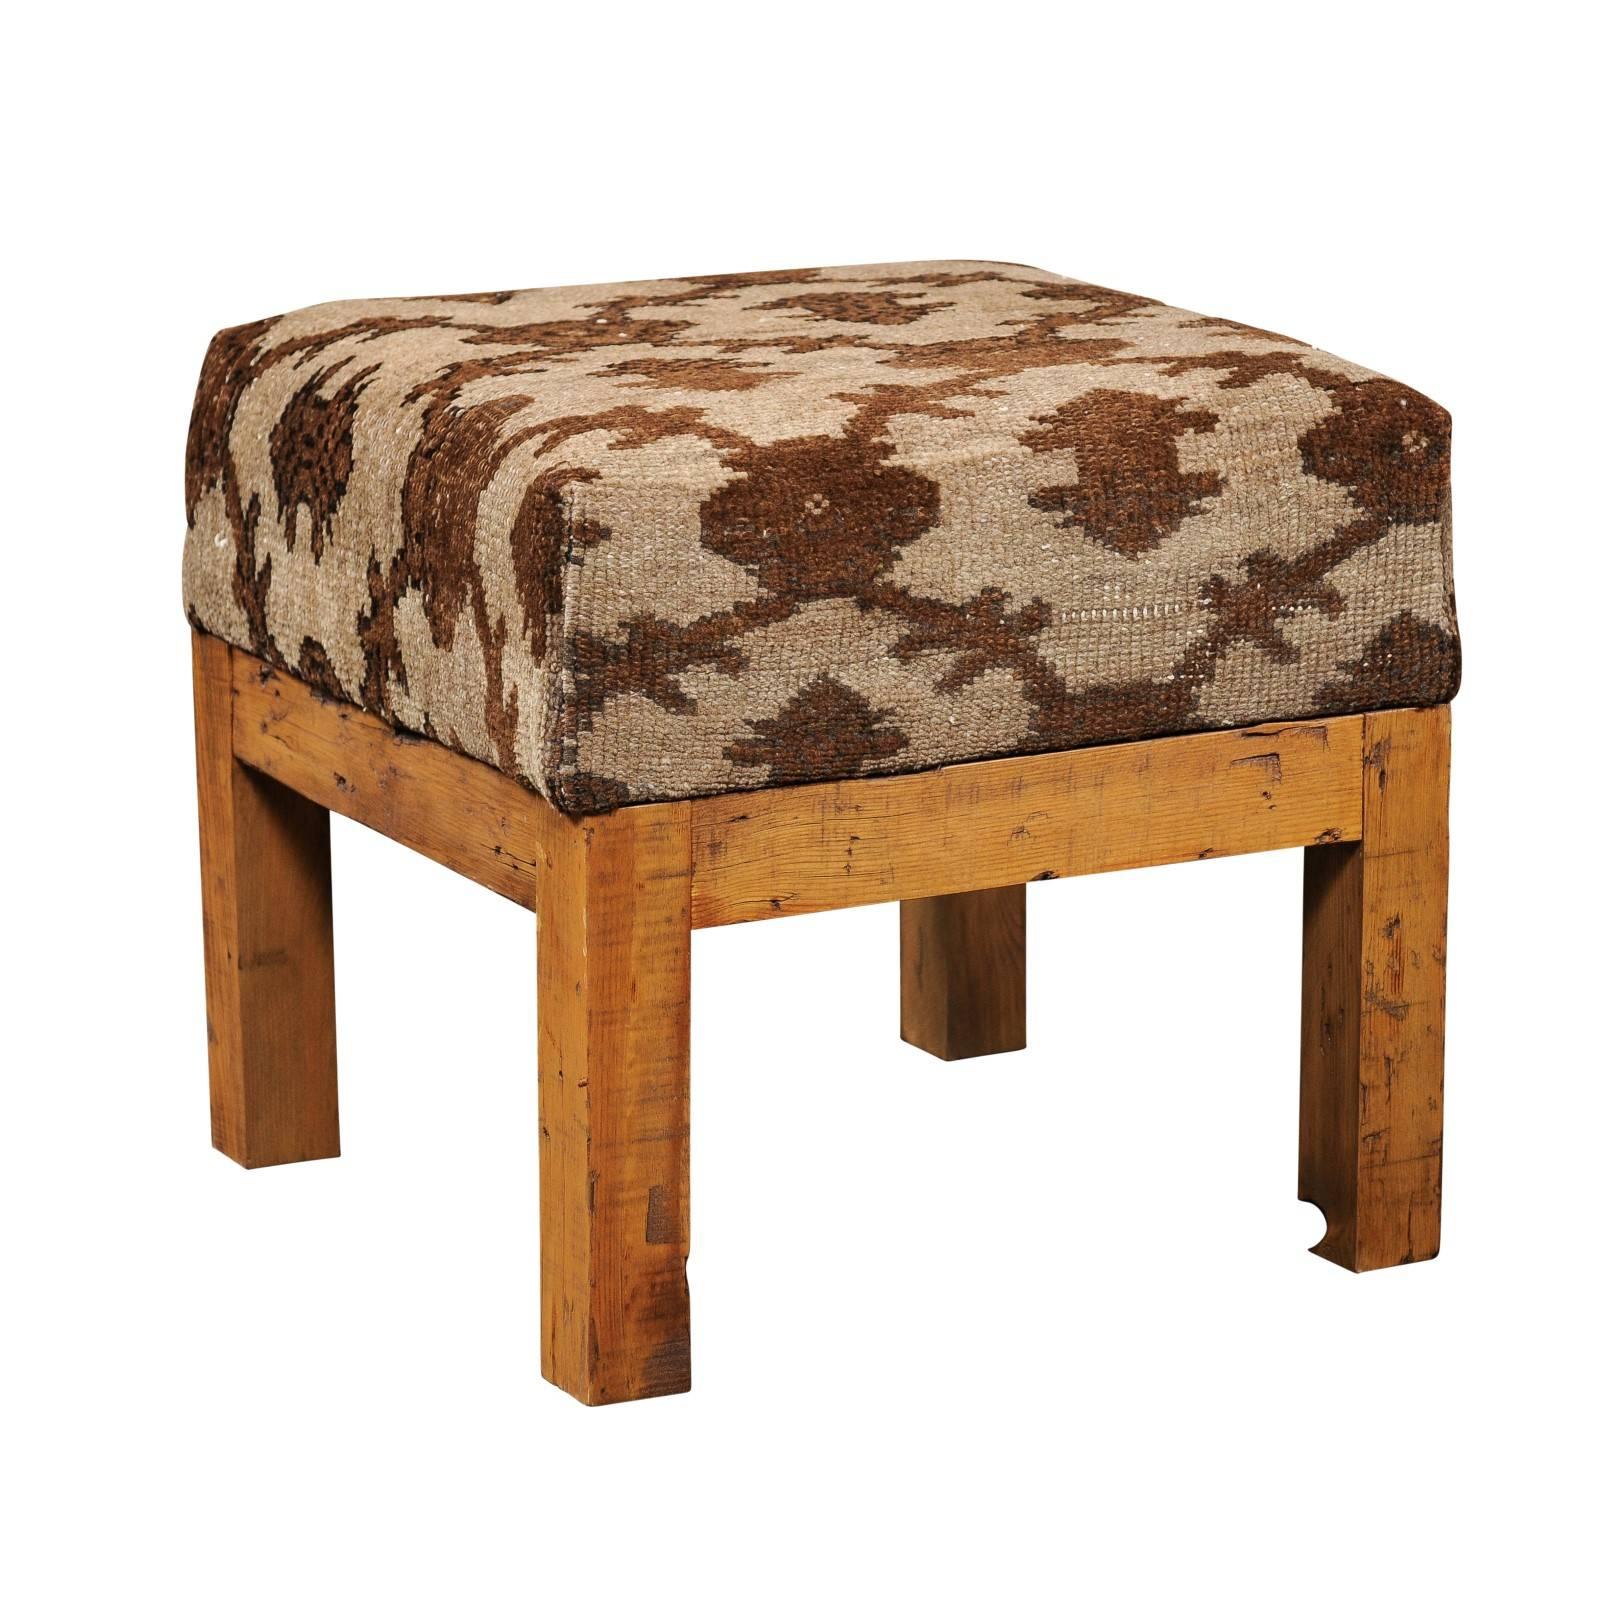 Turkish Brown Wool Upholstered Stool over Old Wood Base with Straight Legs